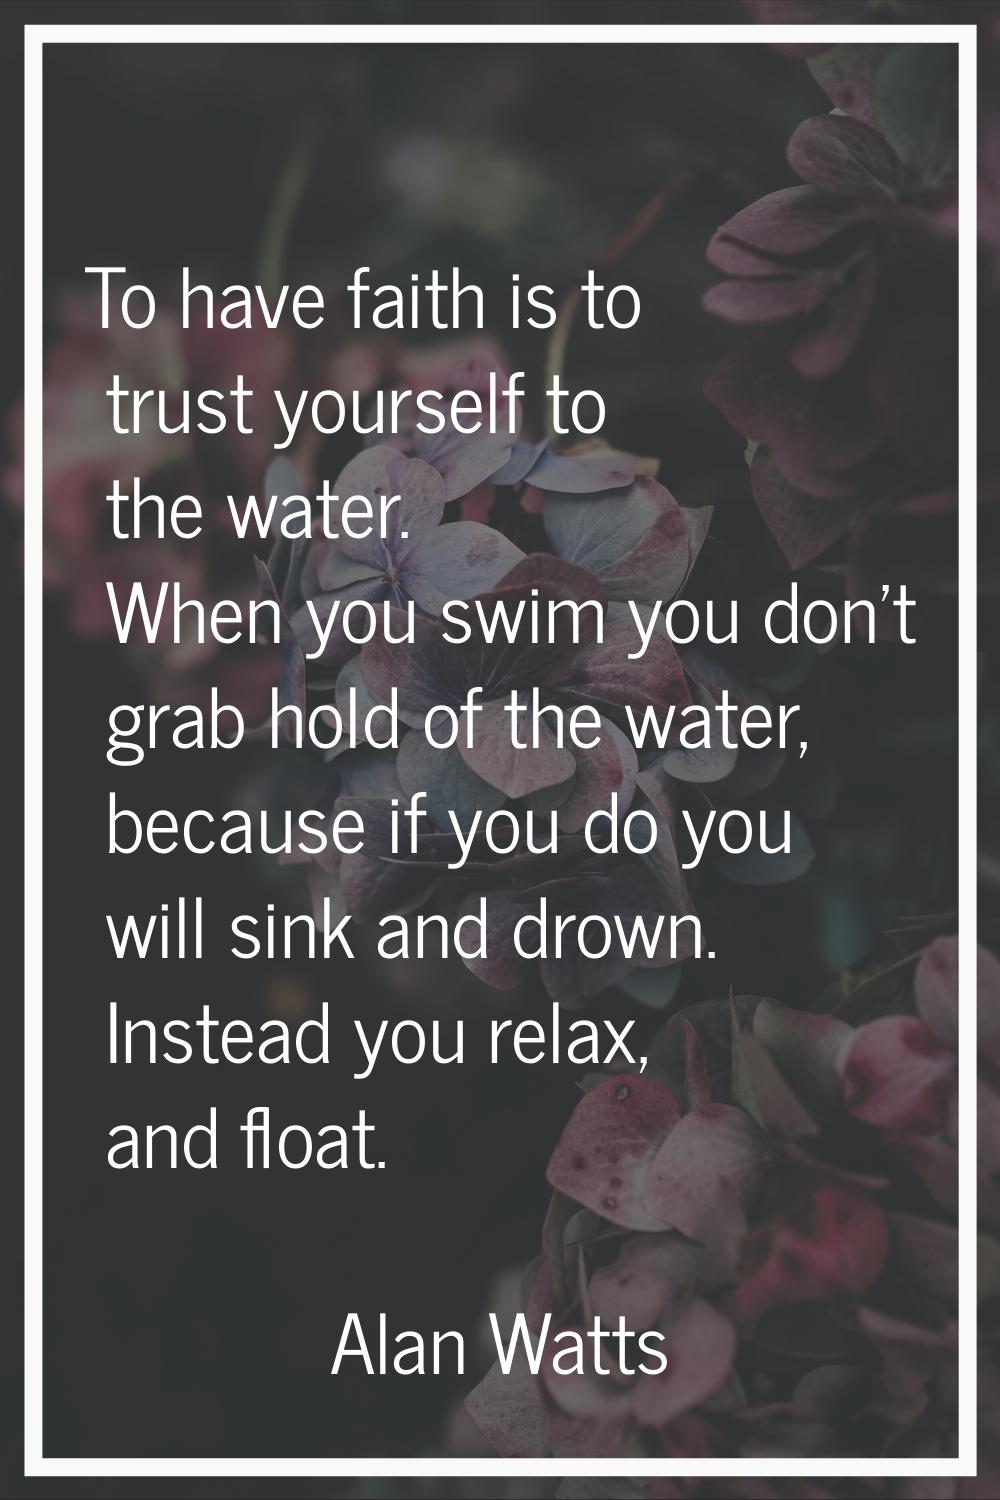 To have faith is to trust yourself to the water. When you swim you don't grab hold of the water, be